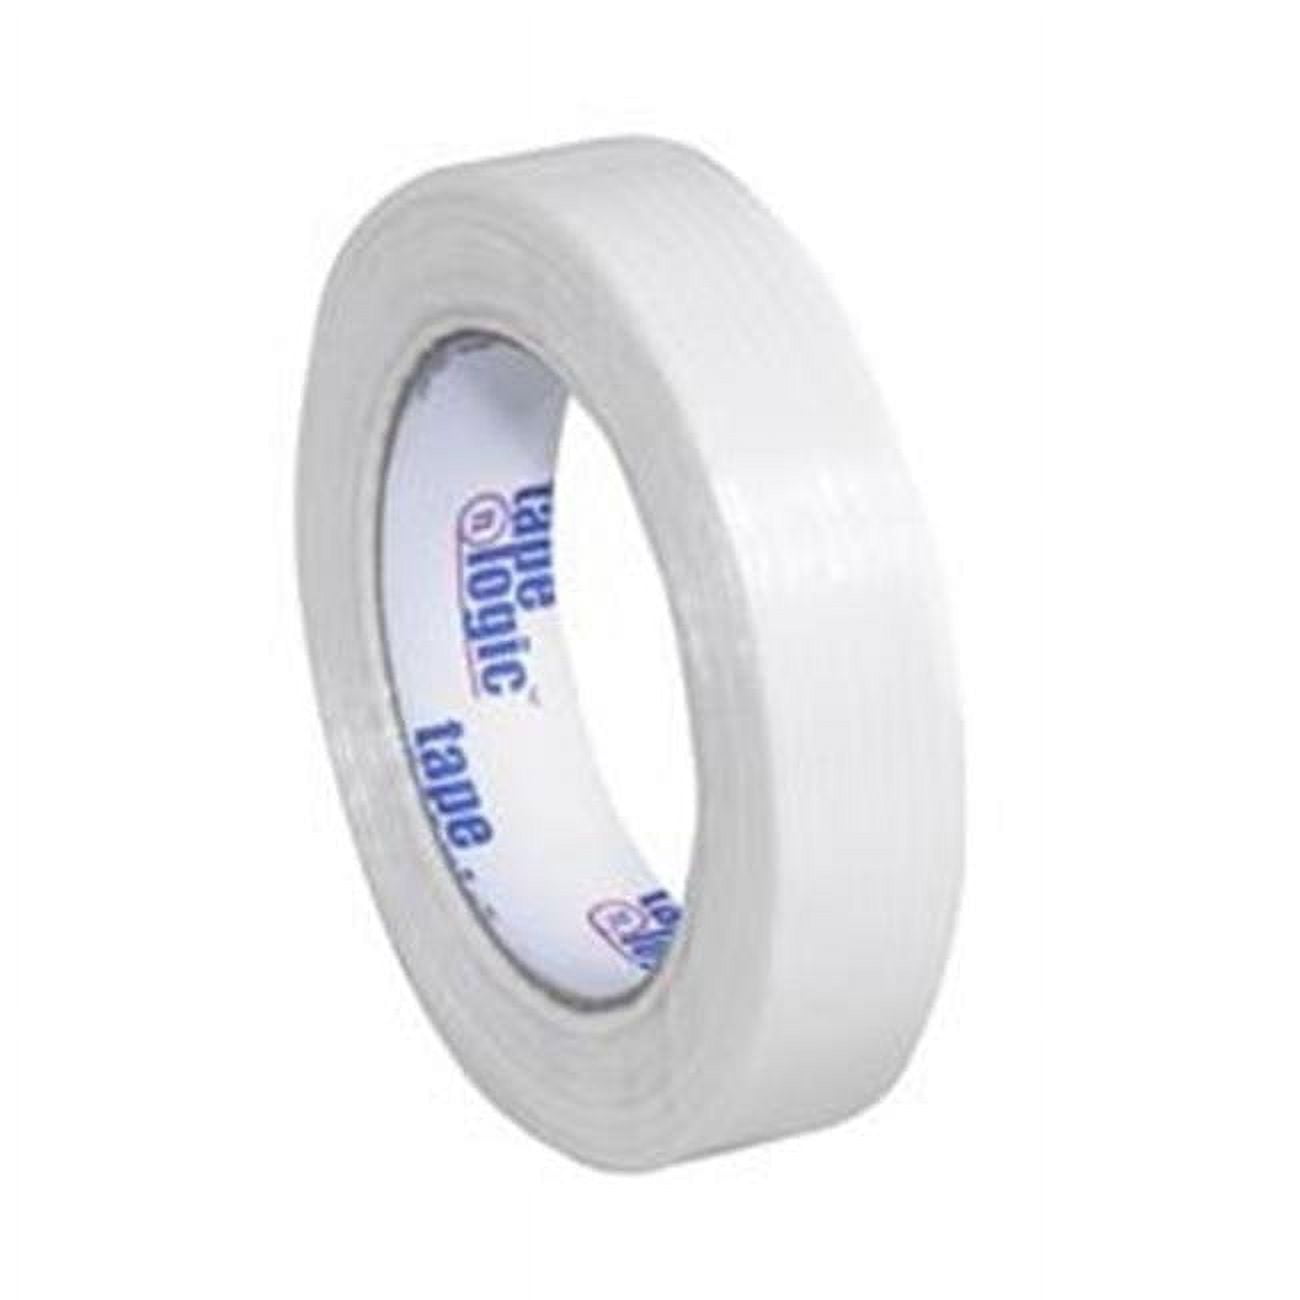 UPC 848109022291 product image for Tape Logic T915130012PK 1 in. x 60 yards 1300 Strapping Tape, Clear - Pack of 12 | upcitemdb.com